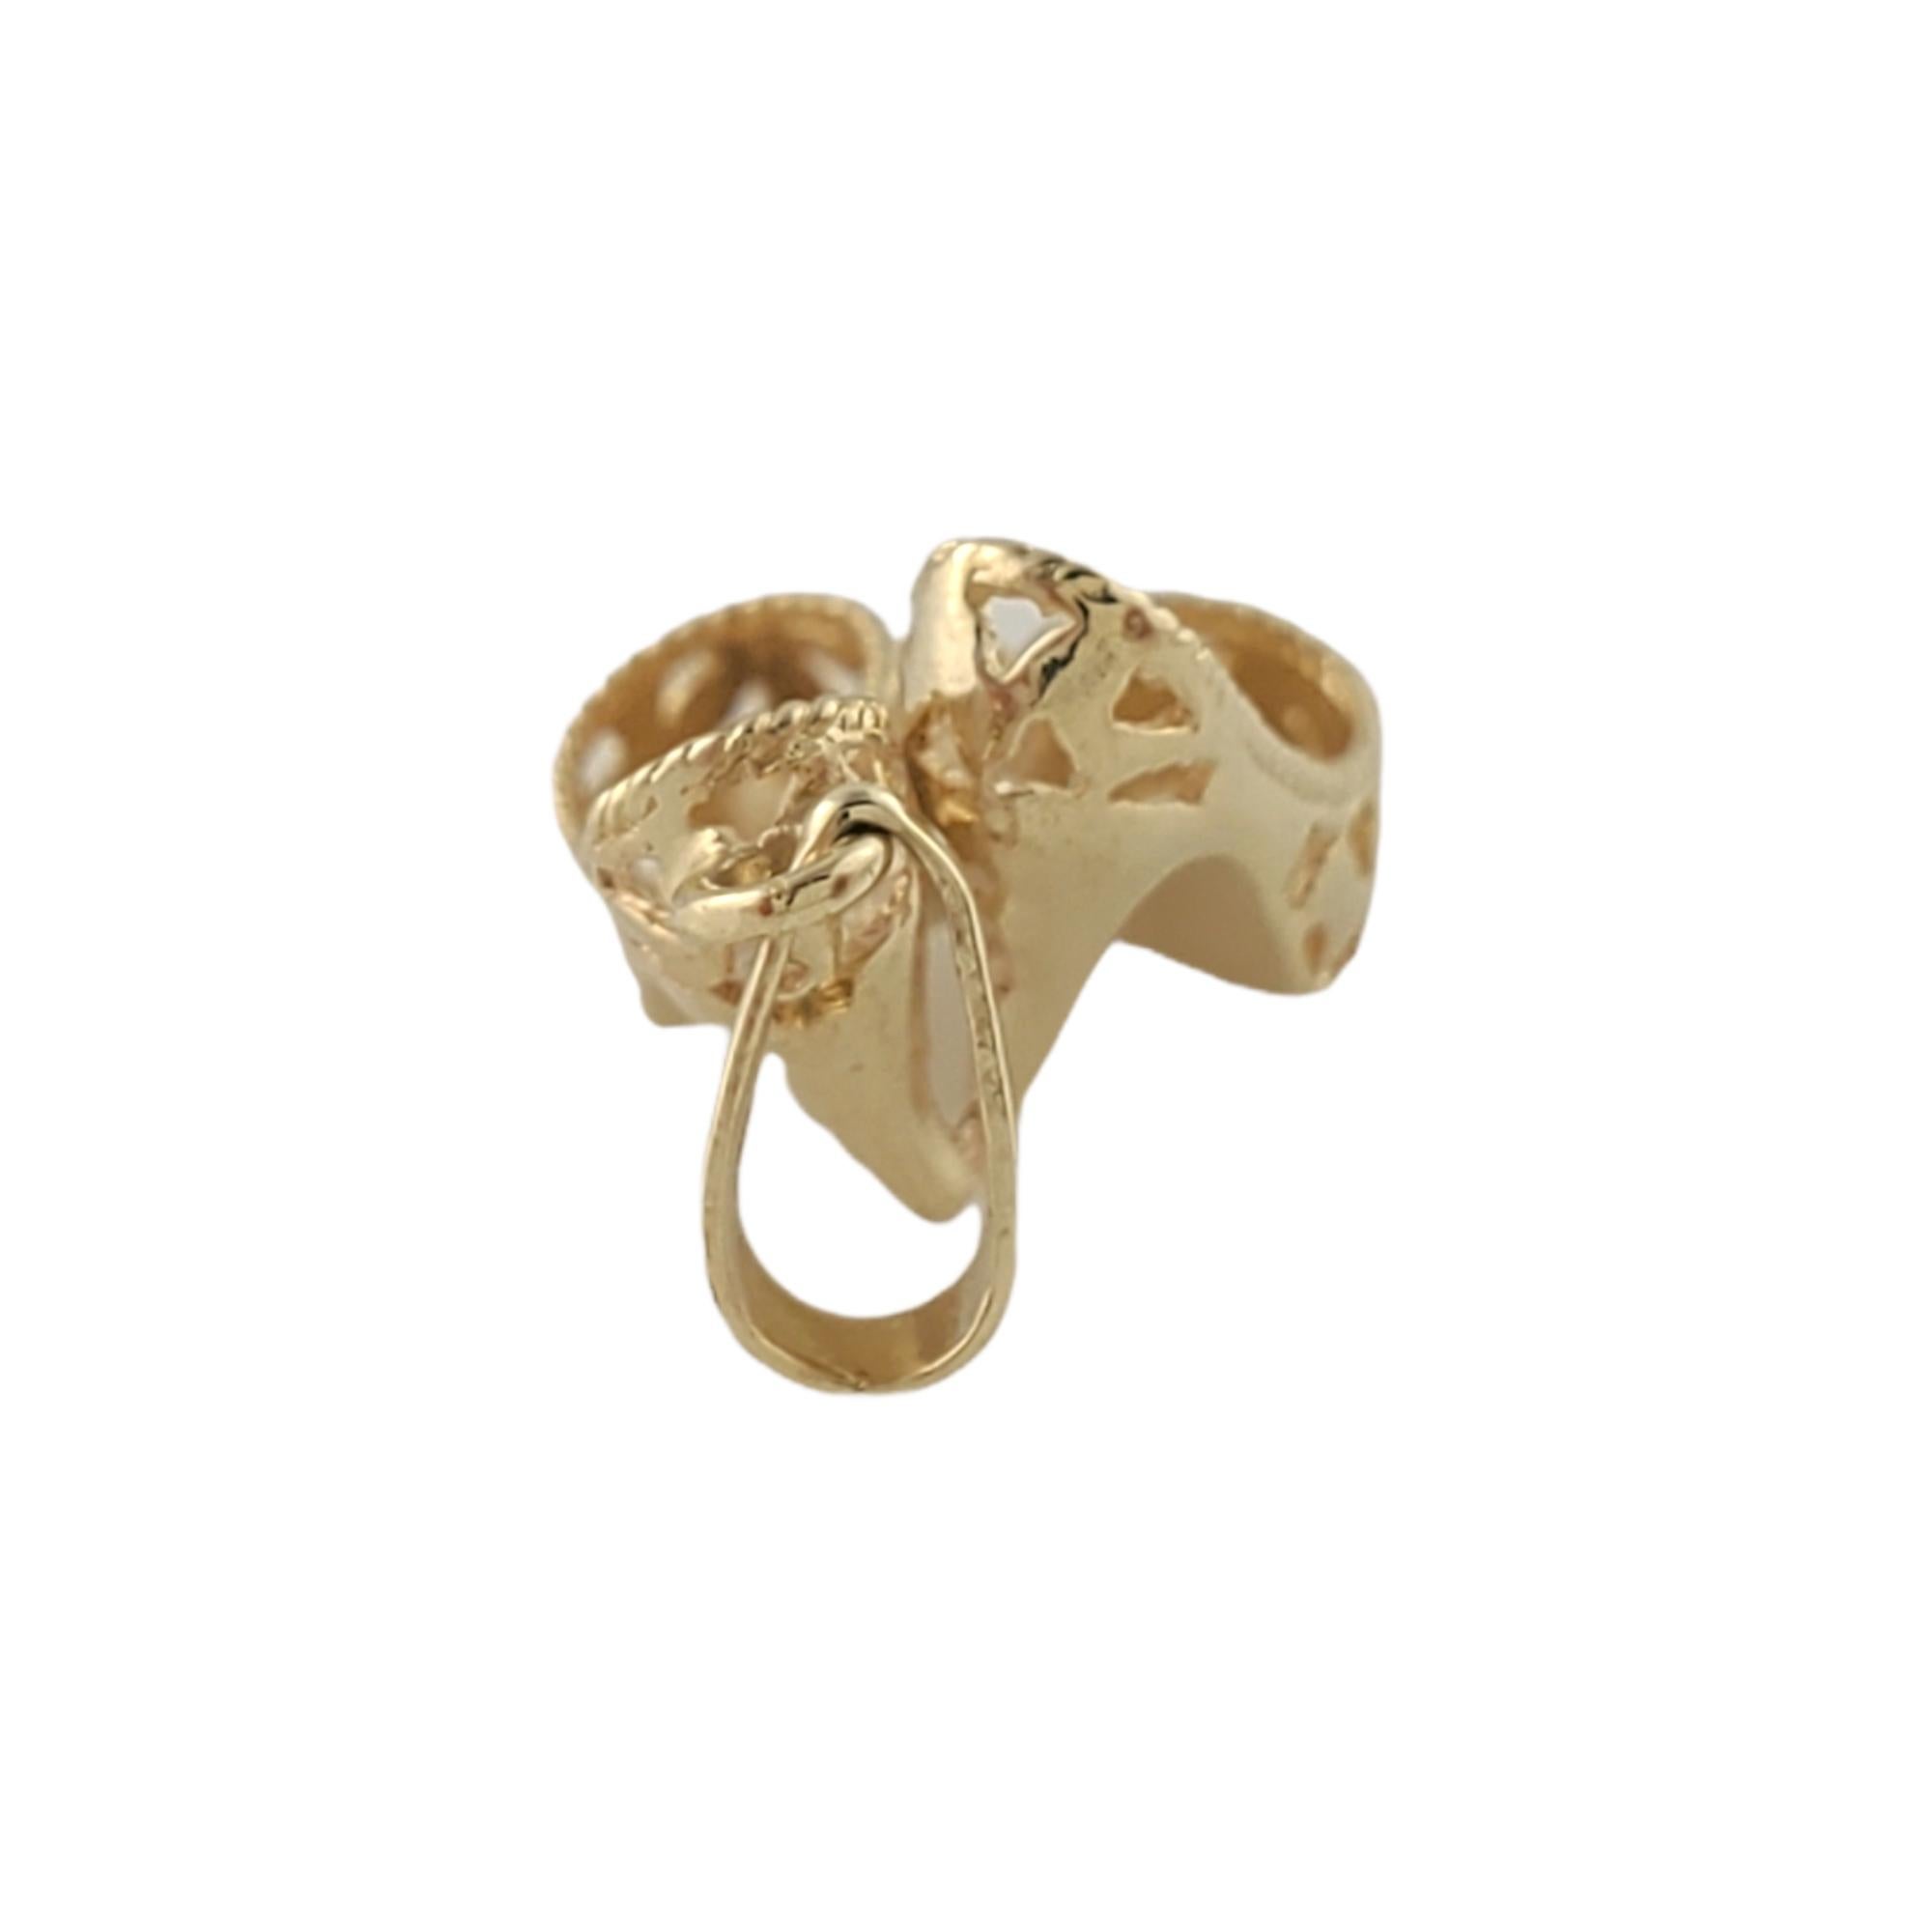 14K Yellow Gold High Heels Charm

This 3D charm features a pair of meticulously detailed high heels in 14K yellow gold.

Size: 16 mm X 8 mm

Weight: 1.2 g/ 0.7 dwt

Hallmark: 14K

Very good condition, professionally polished.

Will come packaged in